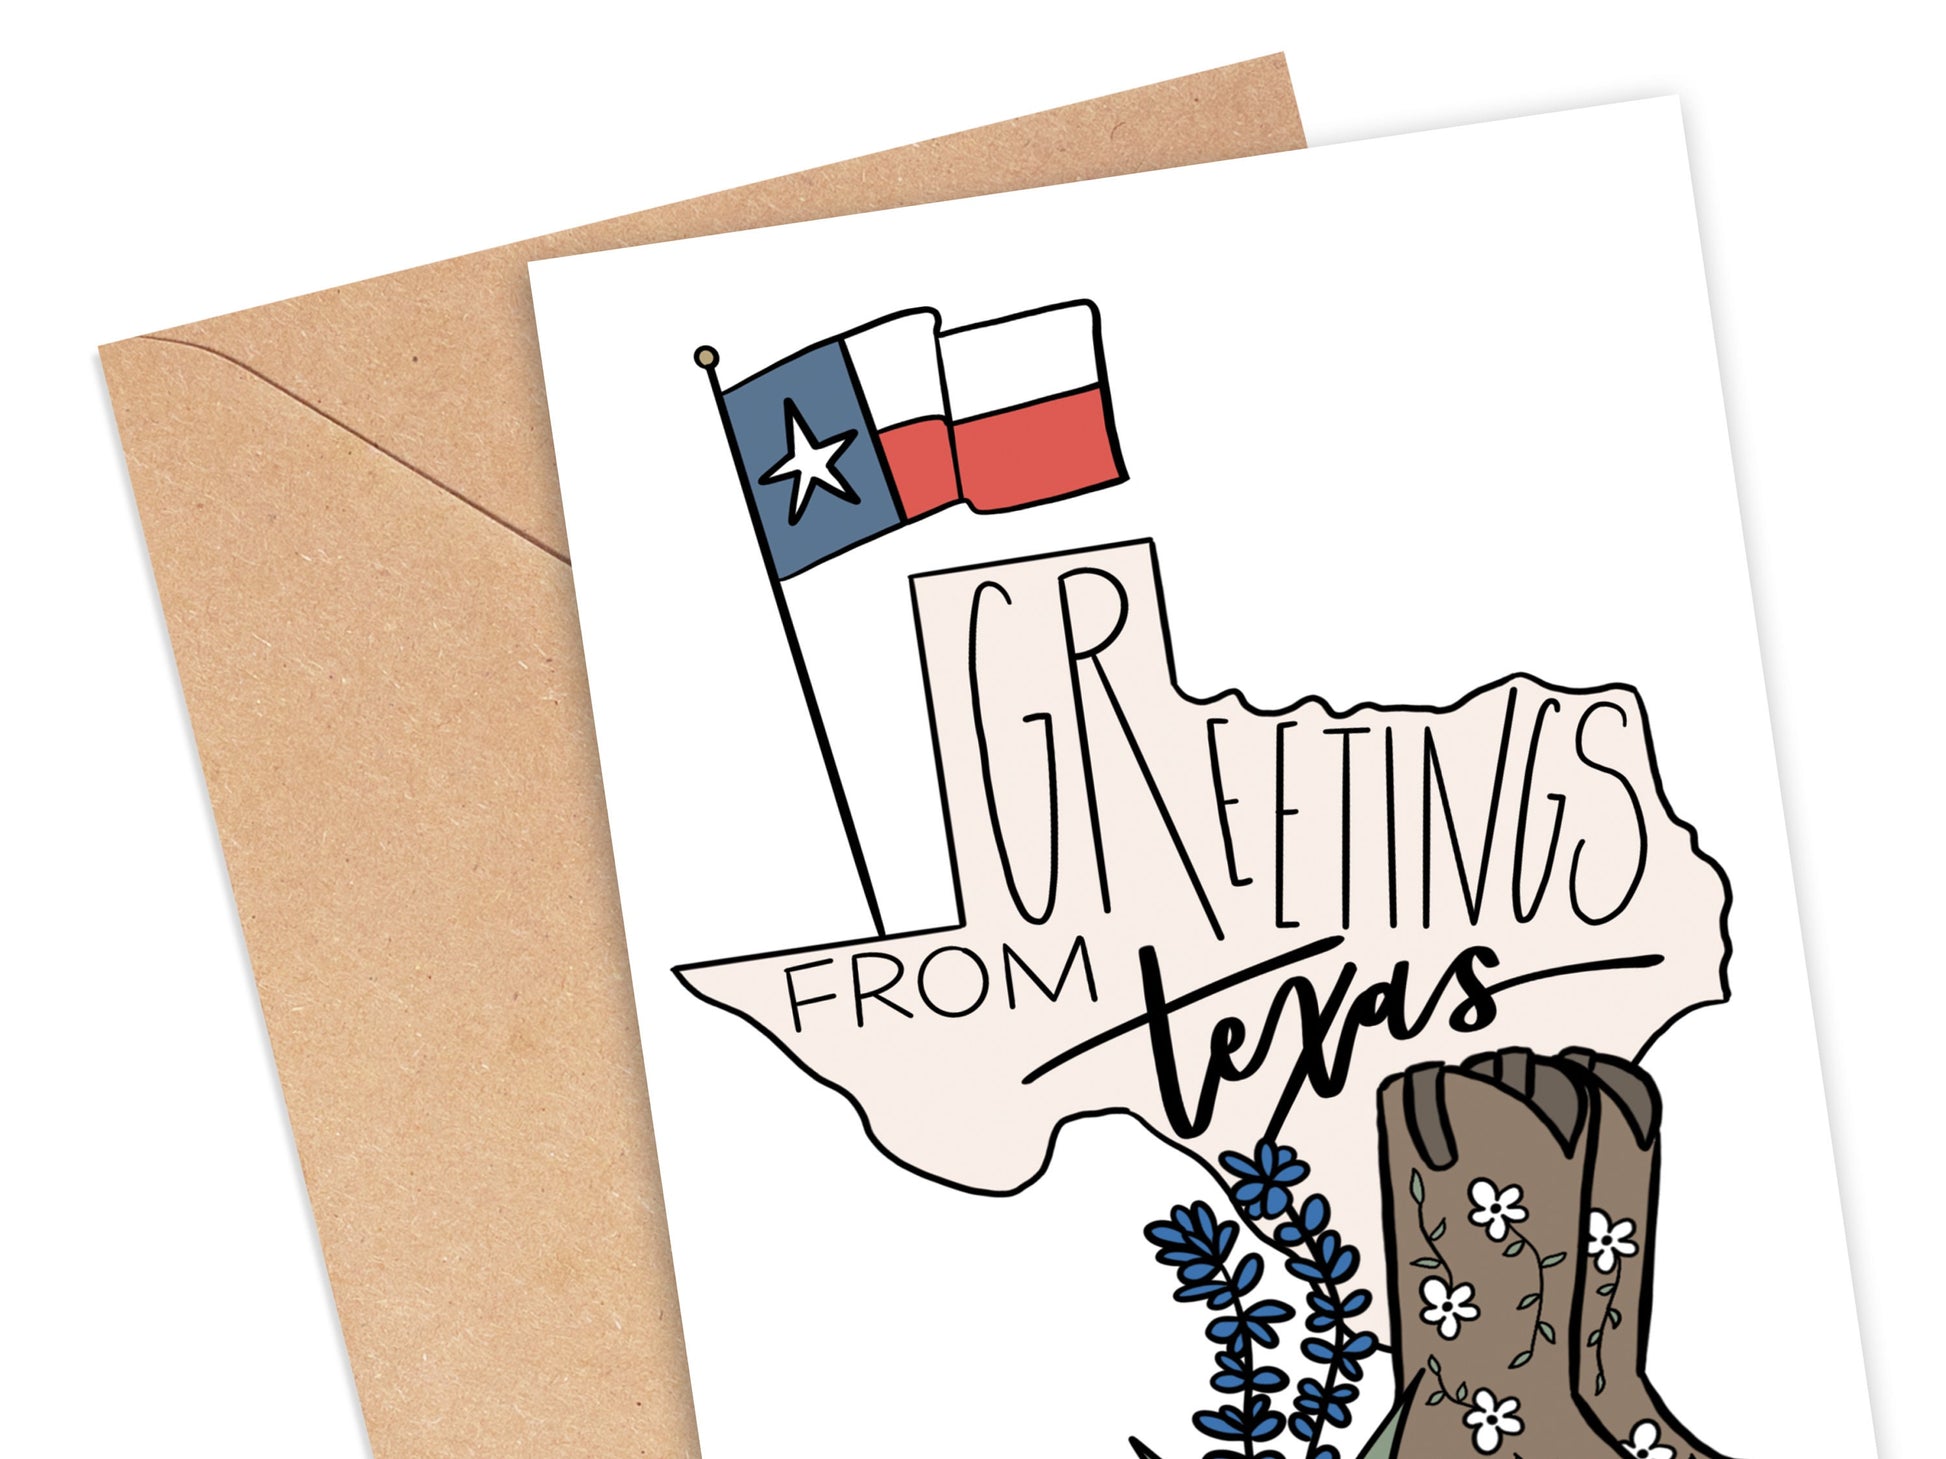 Greetings From Texas Card Simply Happy Cards